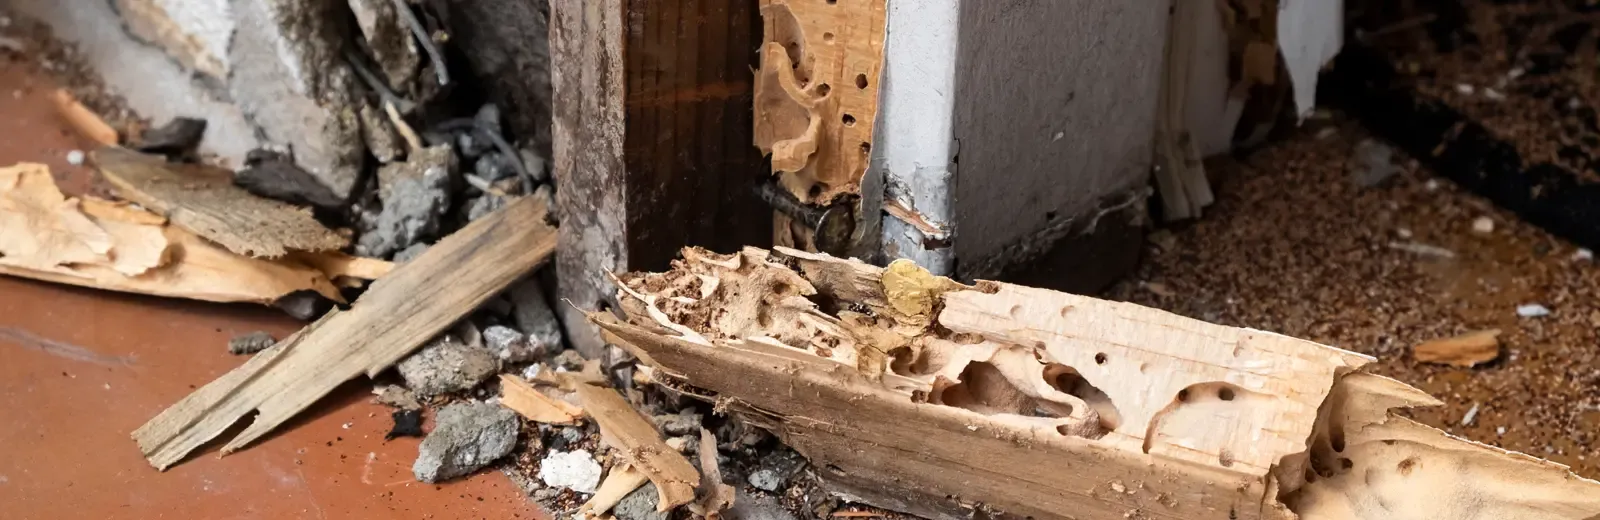 Destroyed wood from termites